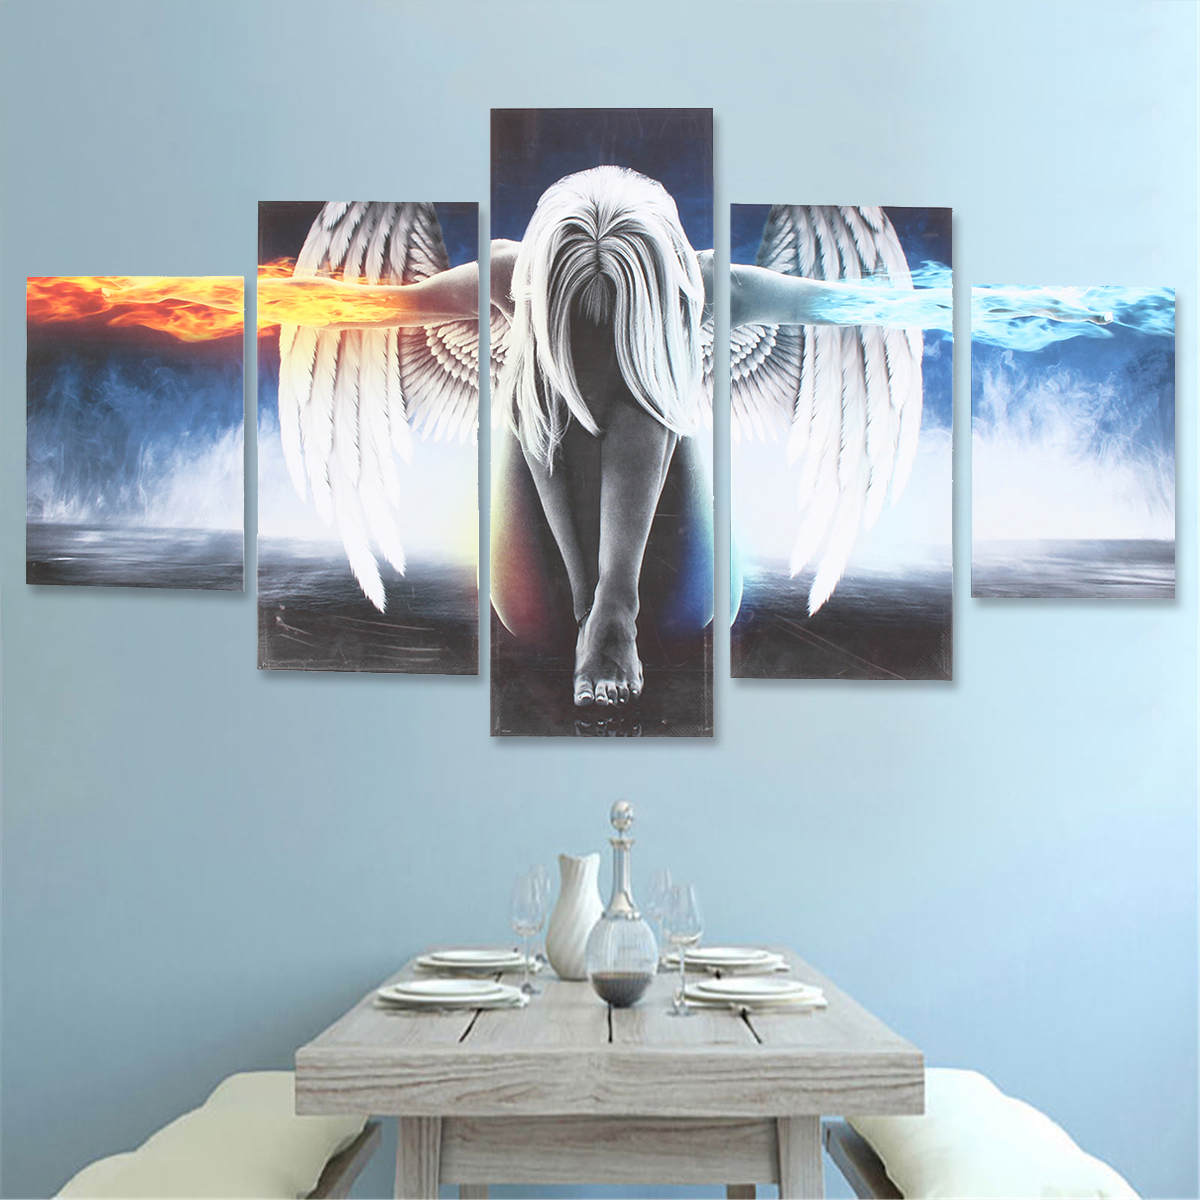 5PCS-Angel-Canvas-Print-Painting-Modern-Art-Wall-Picture-Home-Decor-Decoration-with-Framed-for-Home--1219145-8